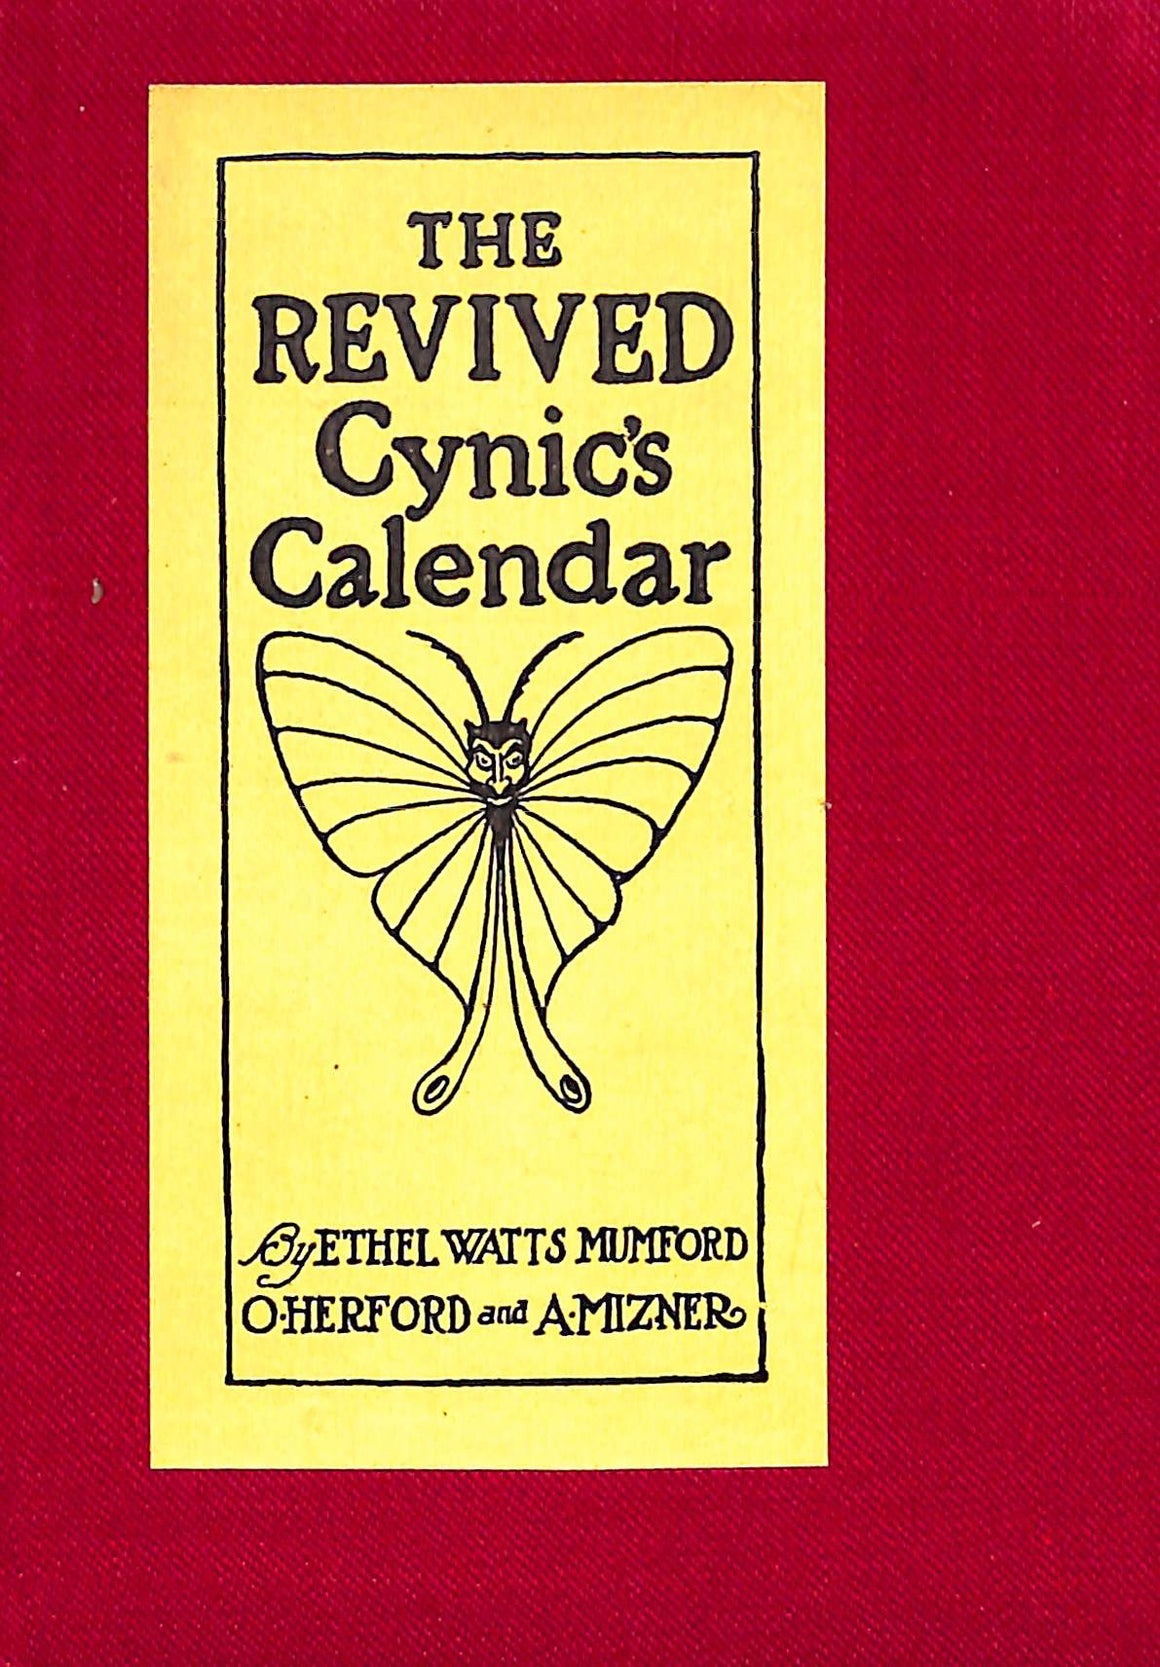 "The Revived Cynic's Calendar" 1917 MUMFORD, Ethel Watts (SOLD)